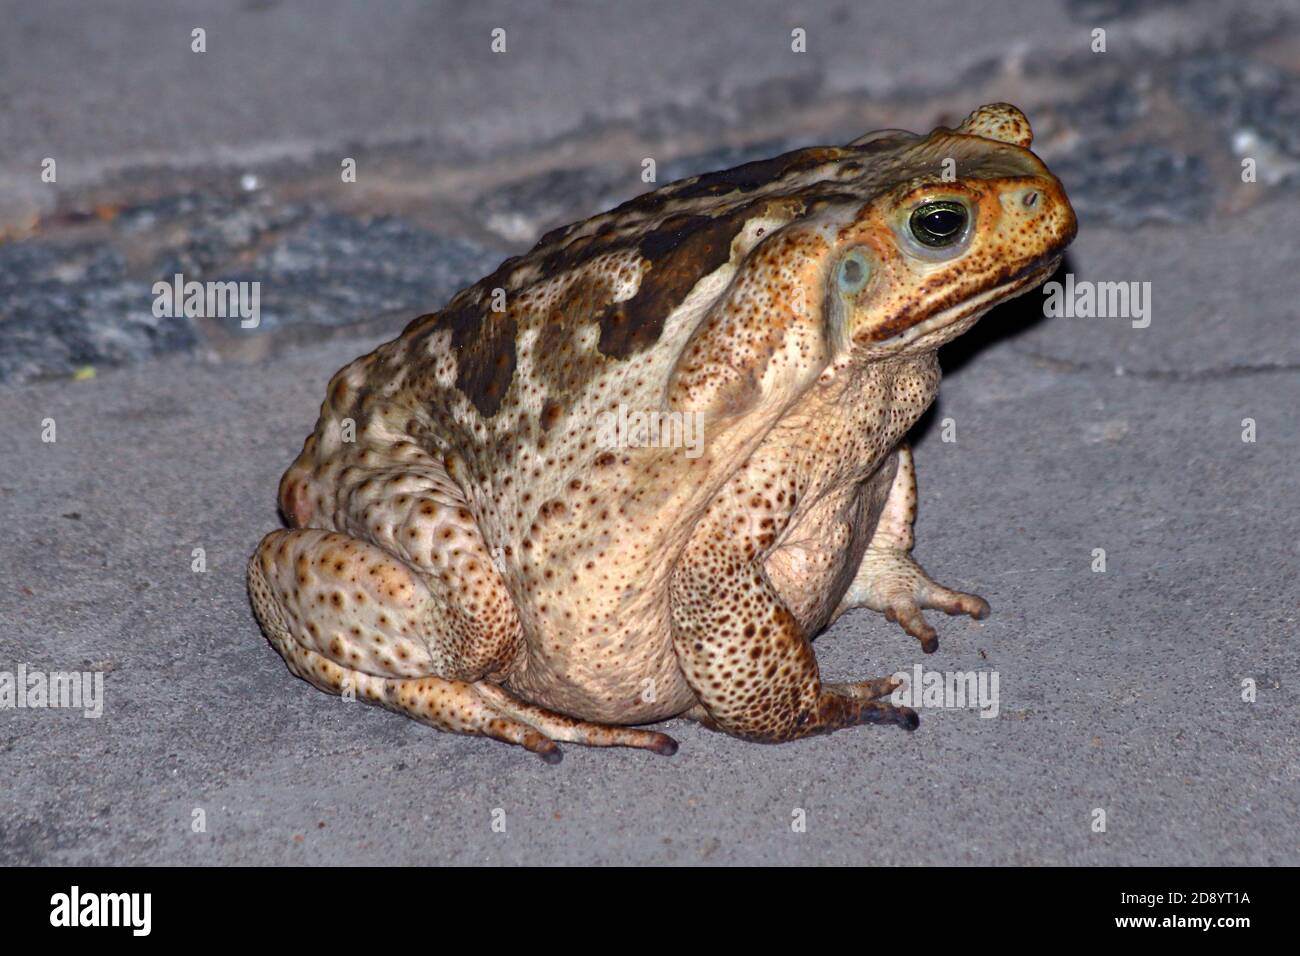 toad cururu (Rhinella diptycha) standing on the cement floor of a city in Brazil Stock Photo